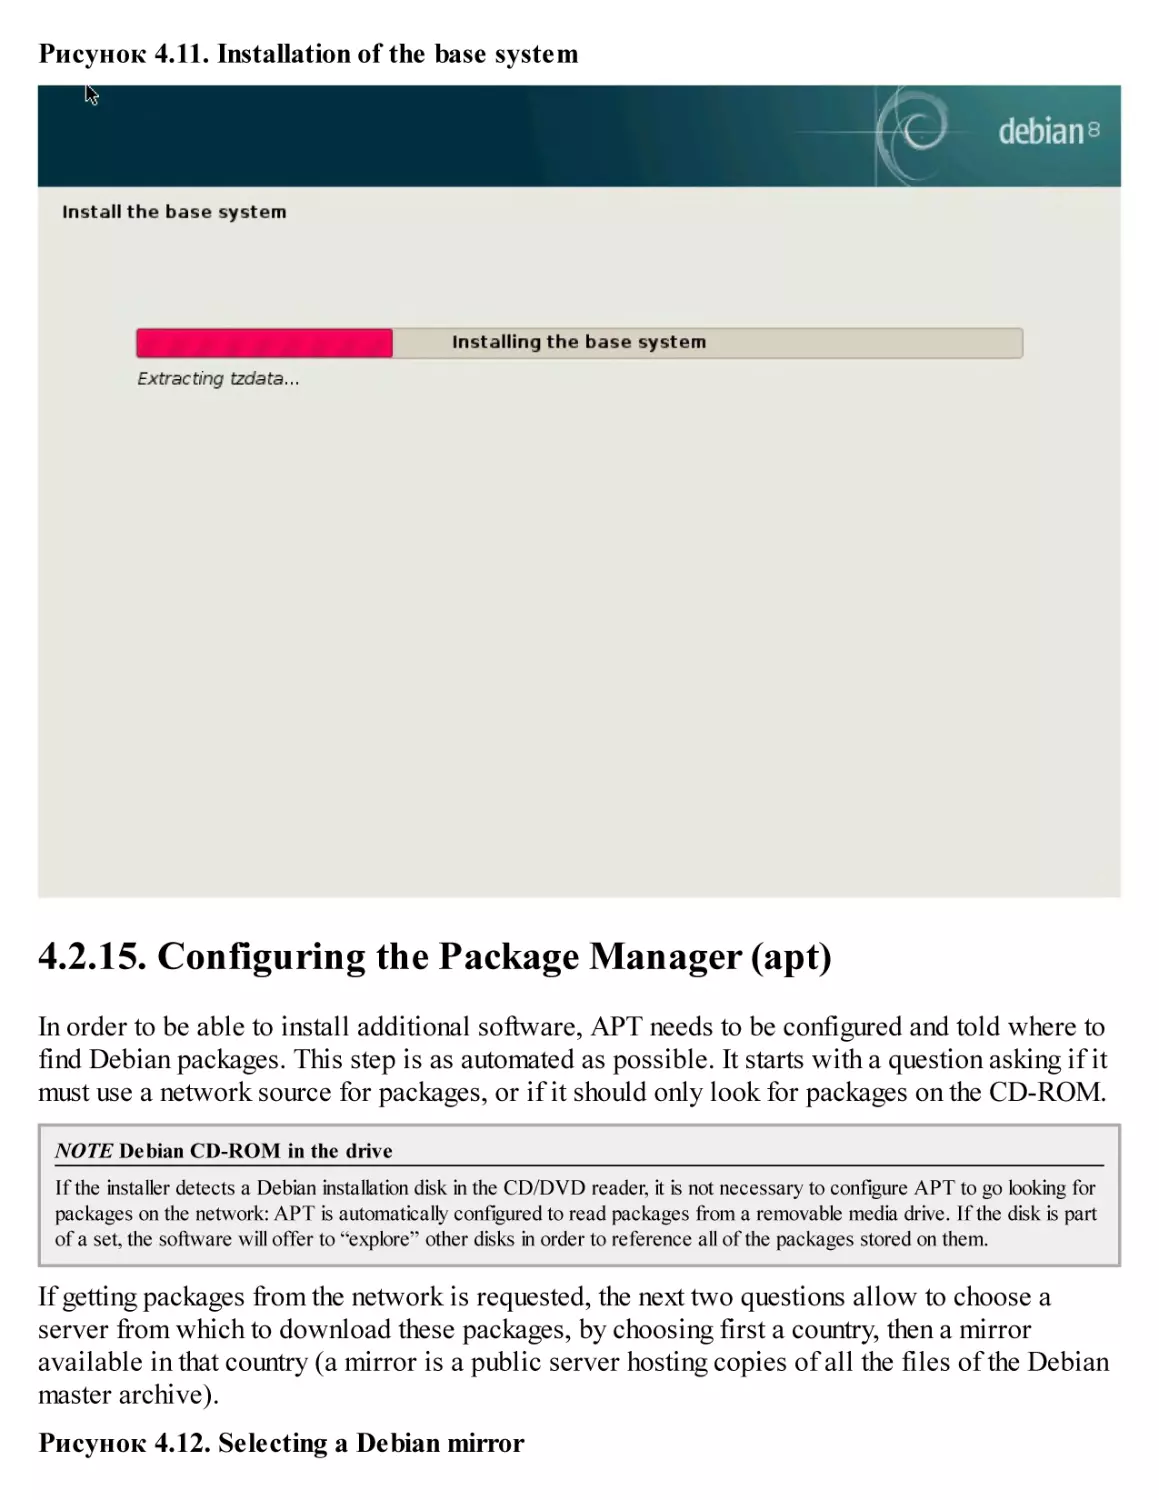 4.2.15. Configuring the Package Manager (apt)